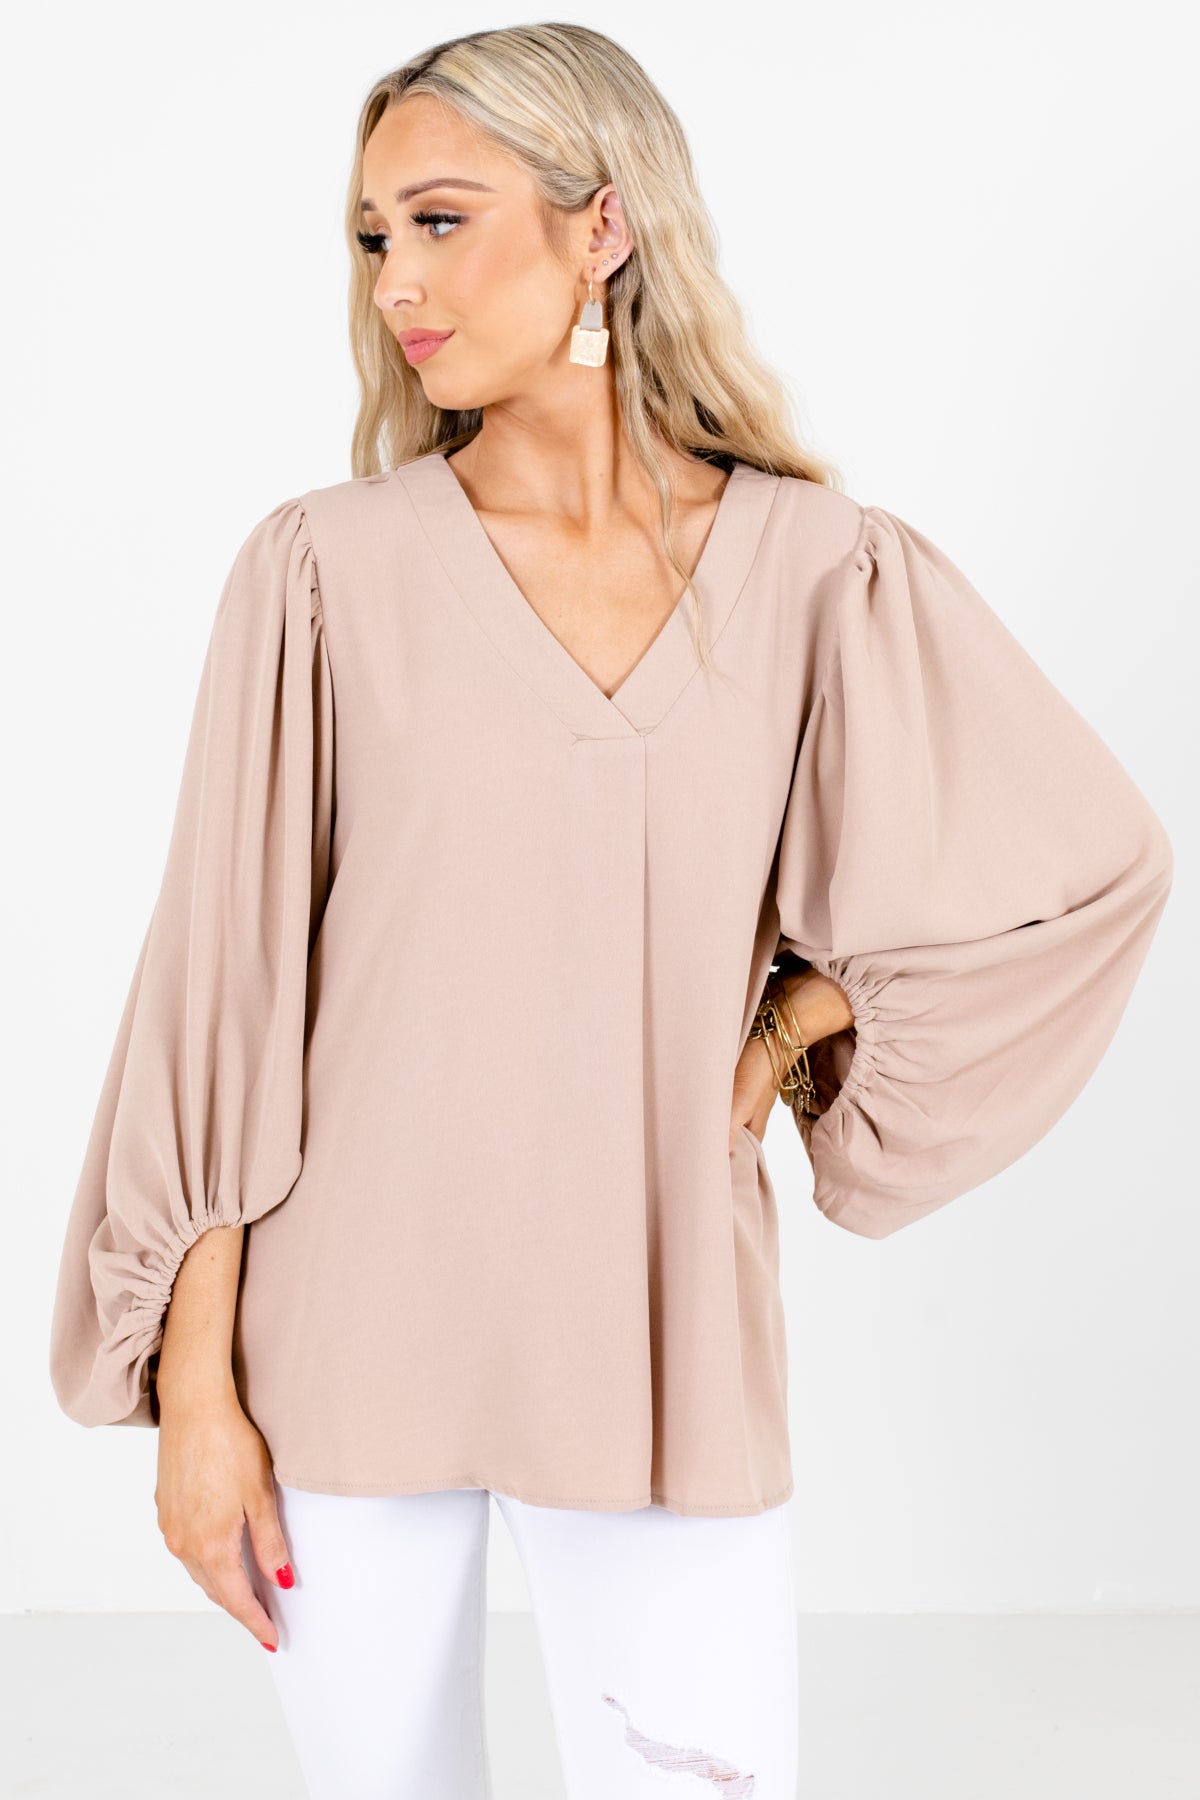 Brown Bishop Sleeve Boutique Blouses for Women, business casual tops